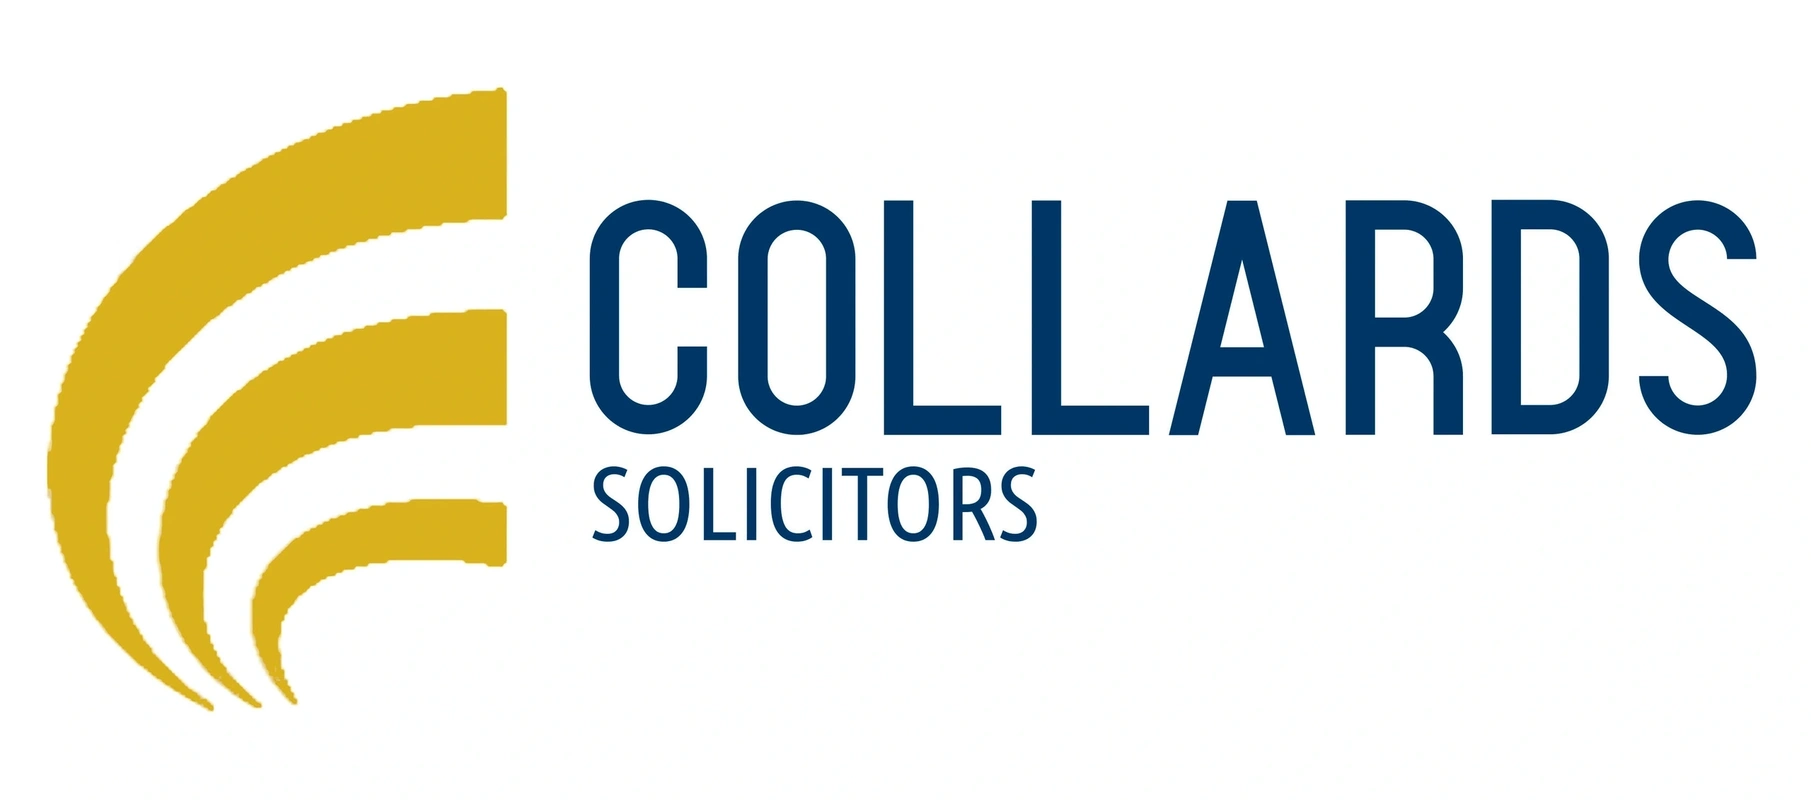 Image has text saying "Collards Solicitors" with a logo at the left.